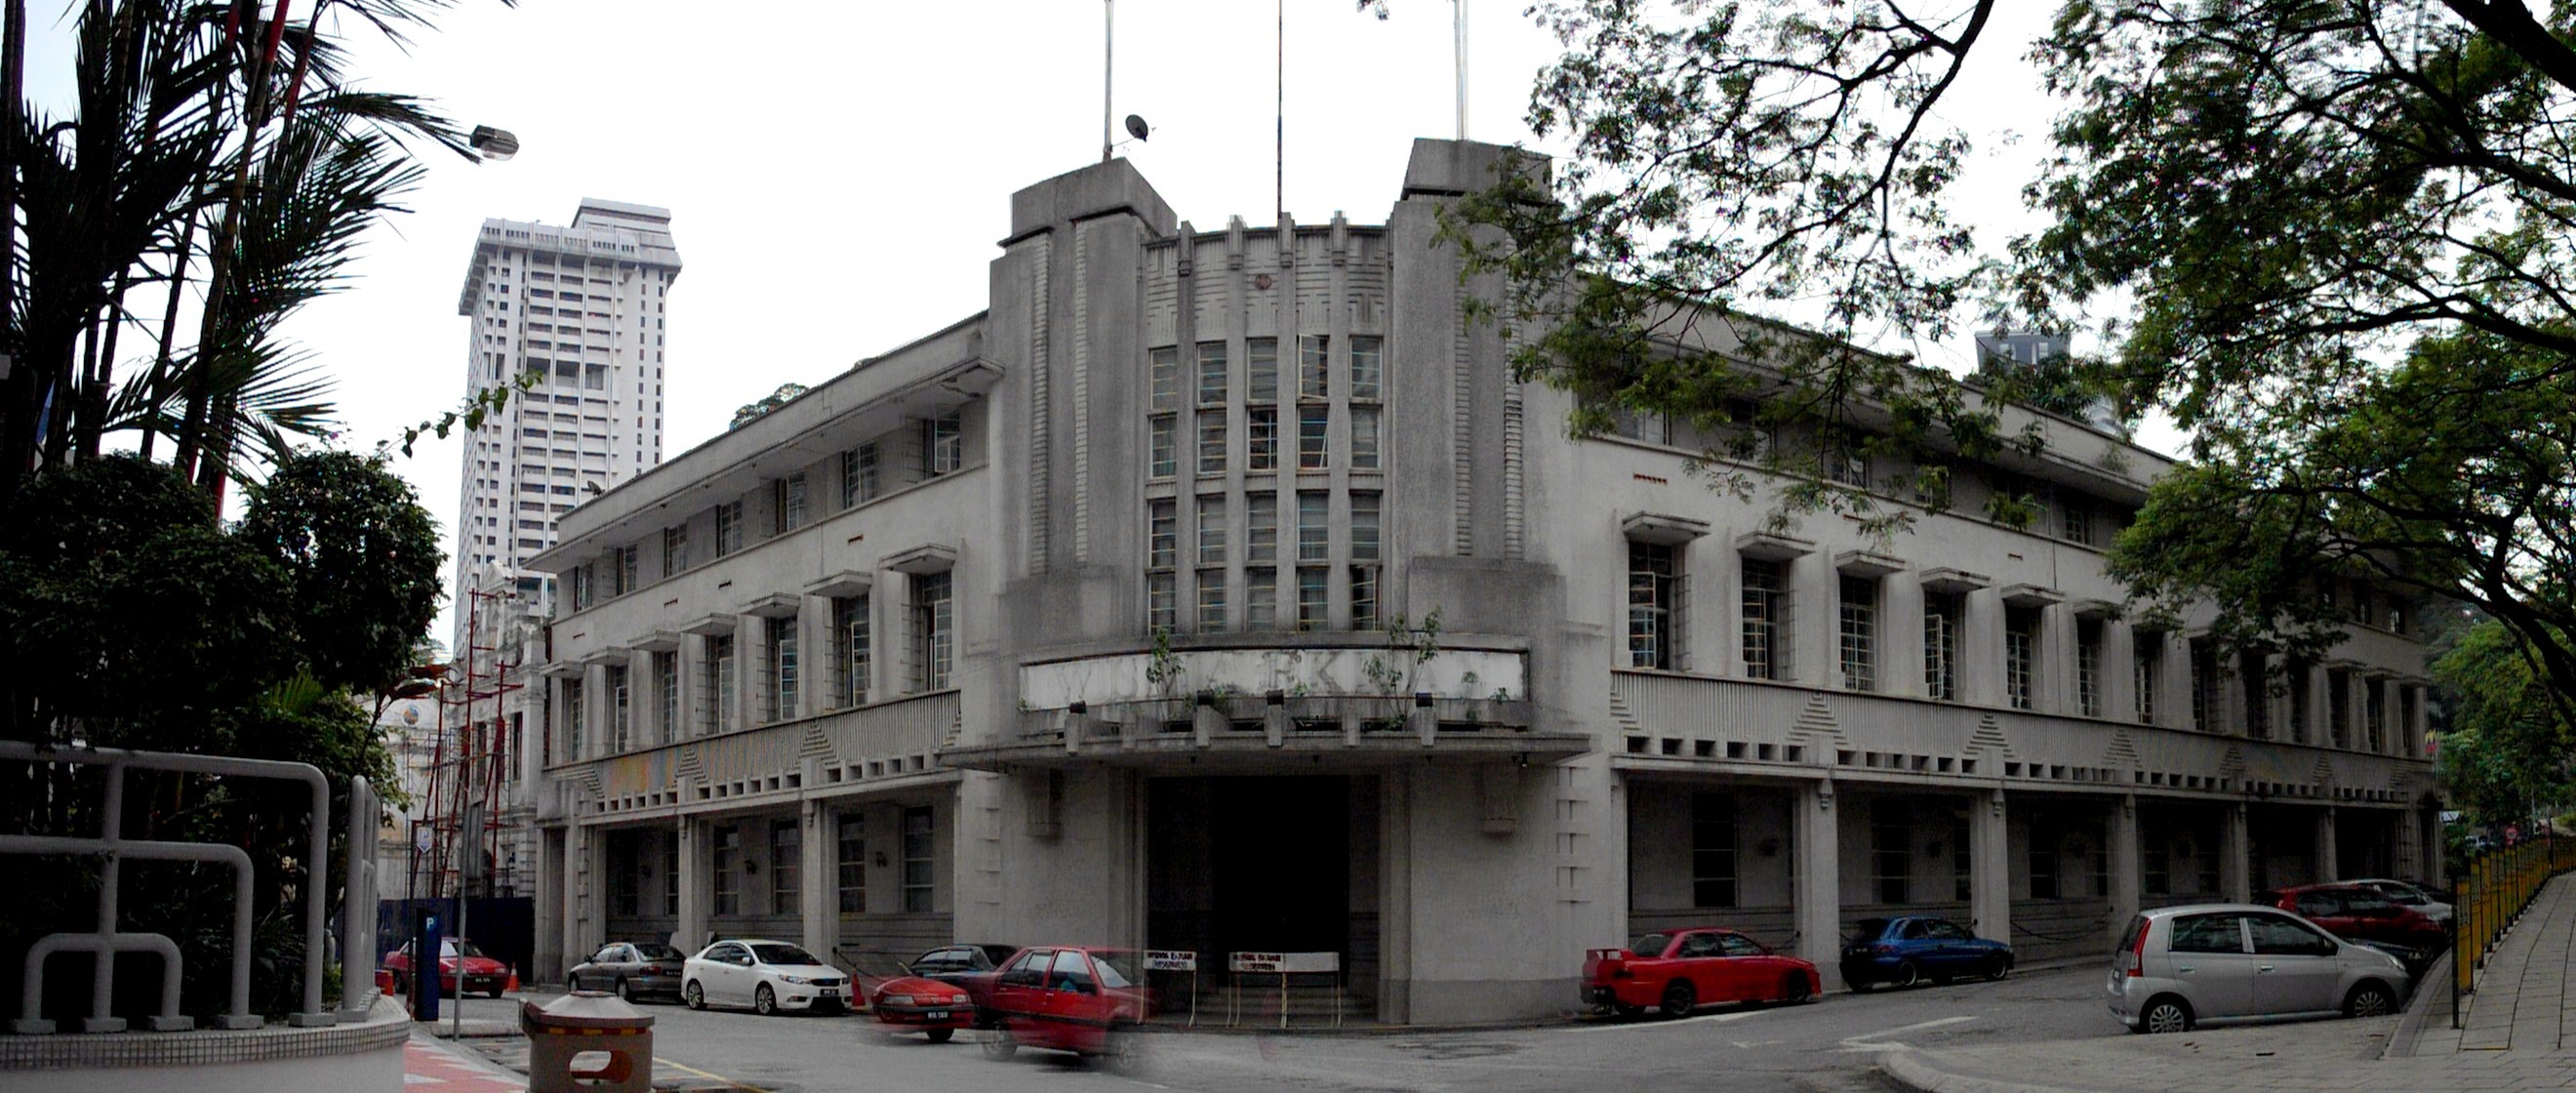 File:Anglo-Oriental Building.JPG - Wikimedia Commons